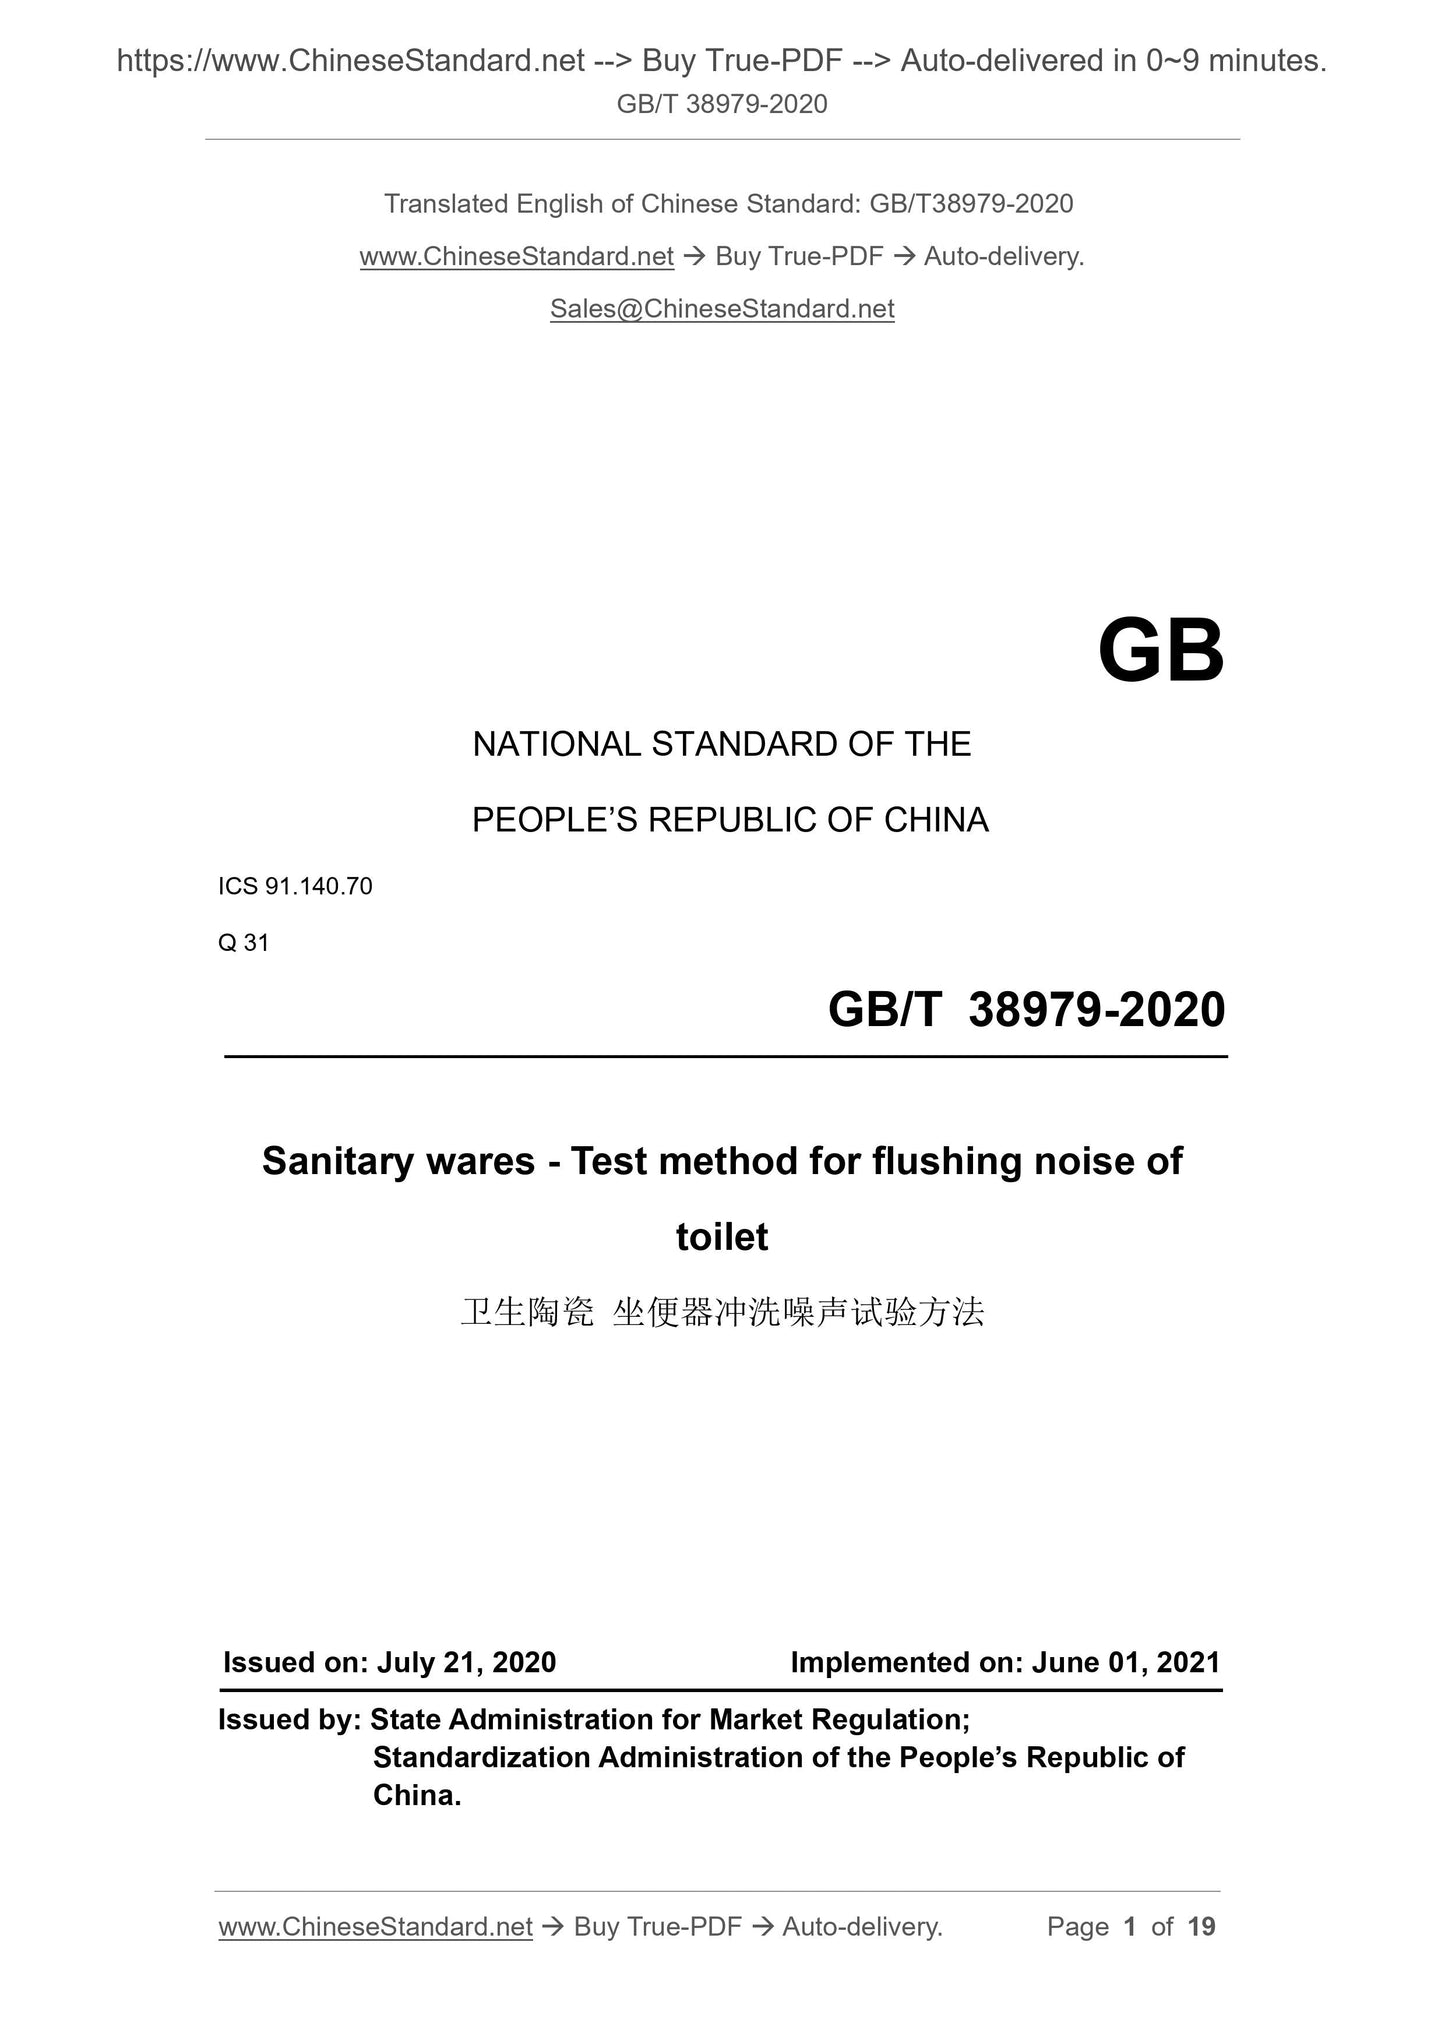 GB/T 38979-2020 Page 1